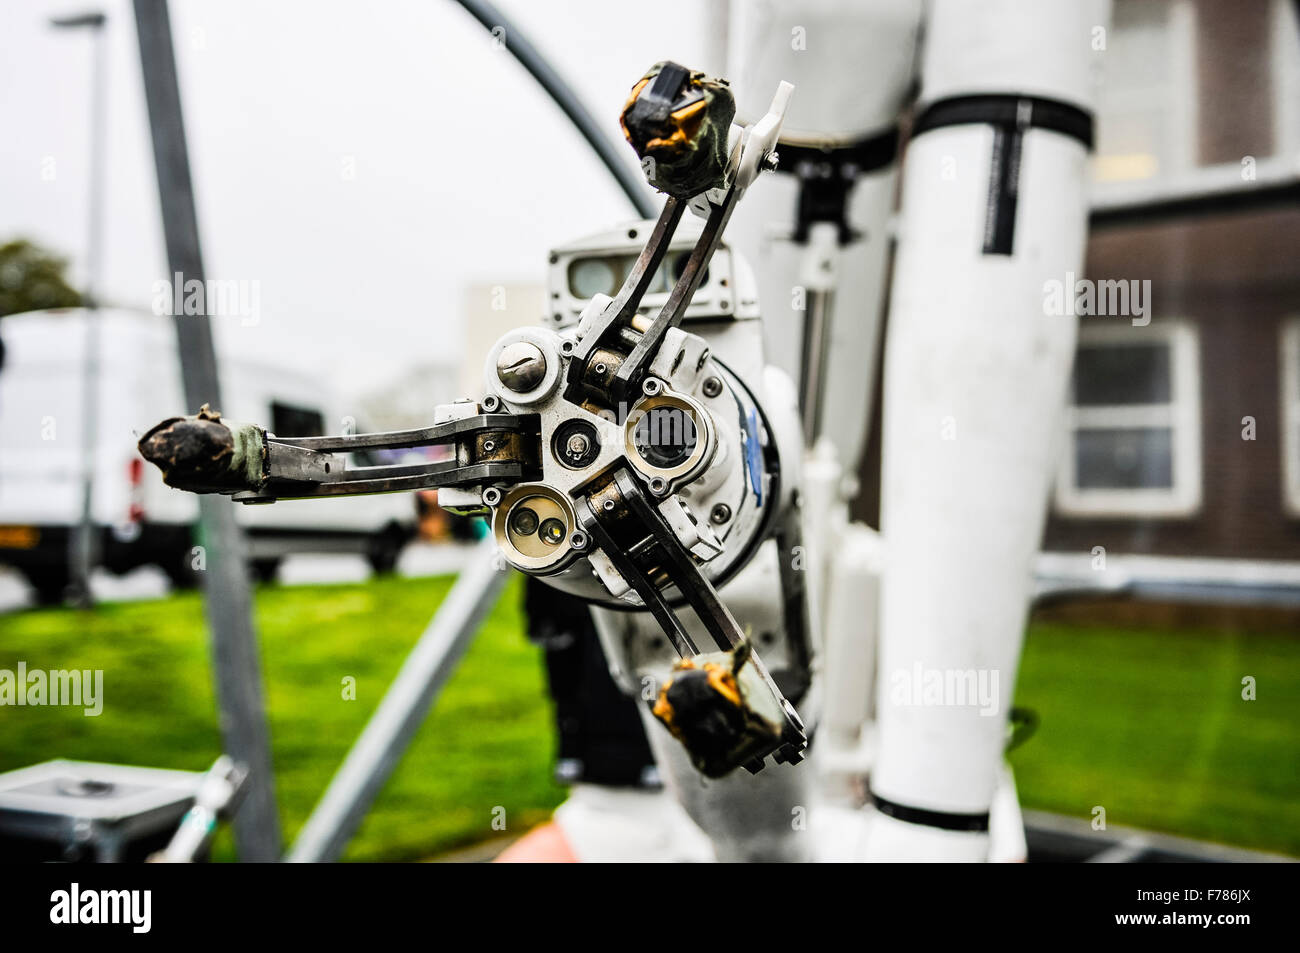 Northern Ireland. 26th November, 2015. Gripper on the end of the arm of a Northrop Grumman Andros Cutlass Unmanned Robotic Vehicle, as used by the 'bomb squad' for examining suspect devices. Credit:  Stephen Barnes/Alamy Live News Stock Photo